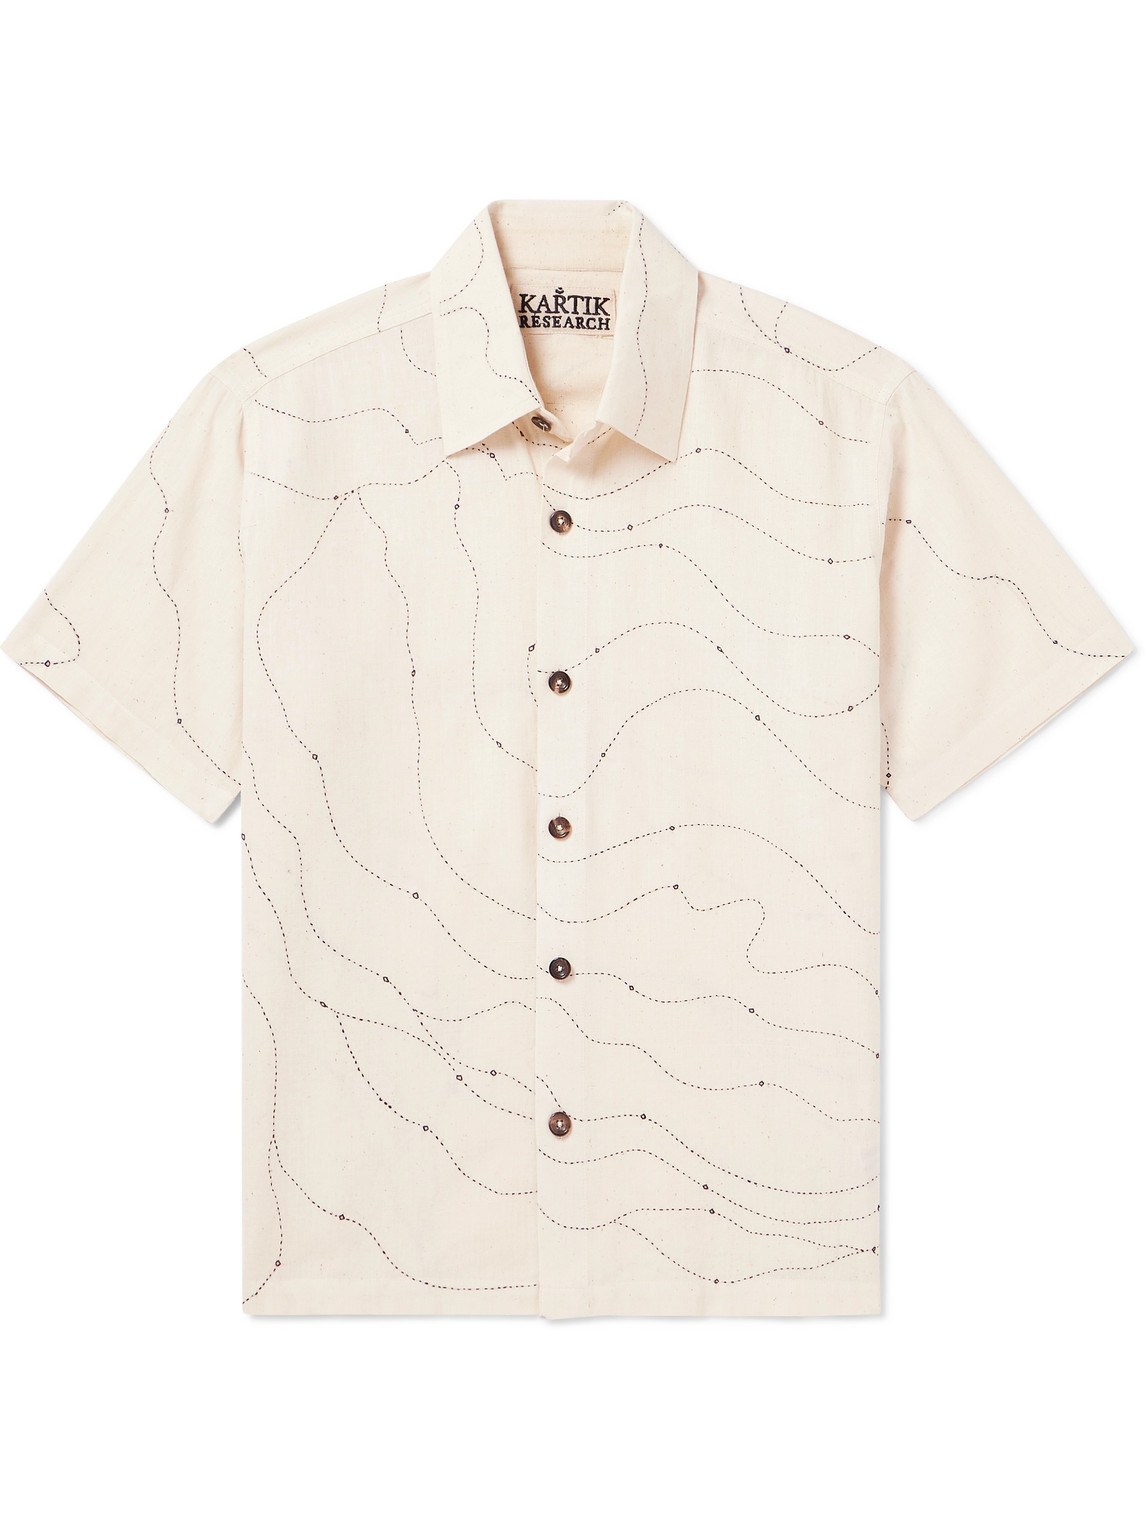 Kartik Research Embroidered Cotton Shirt In White